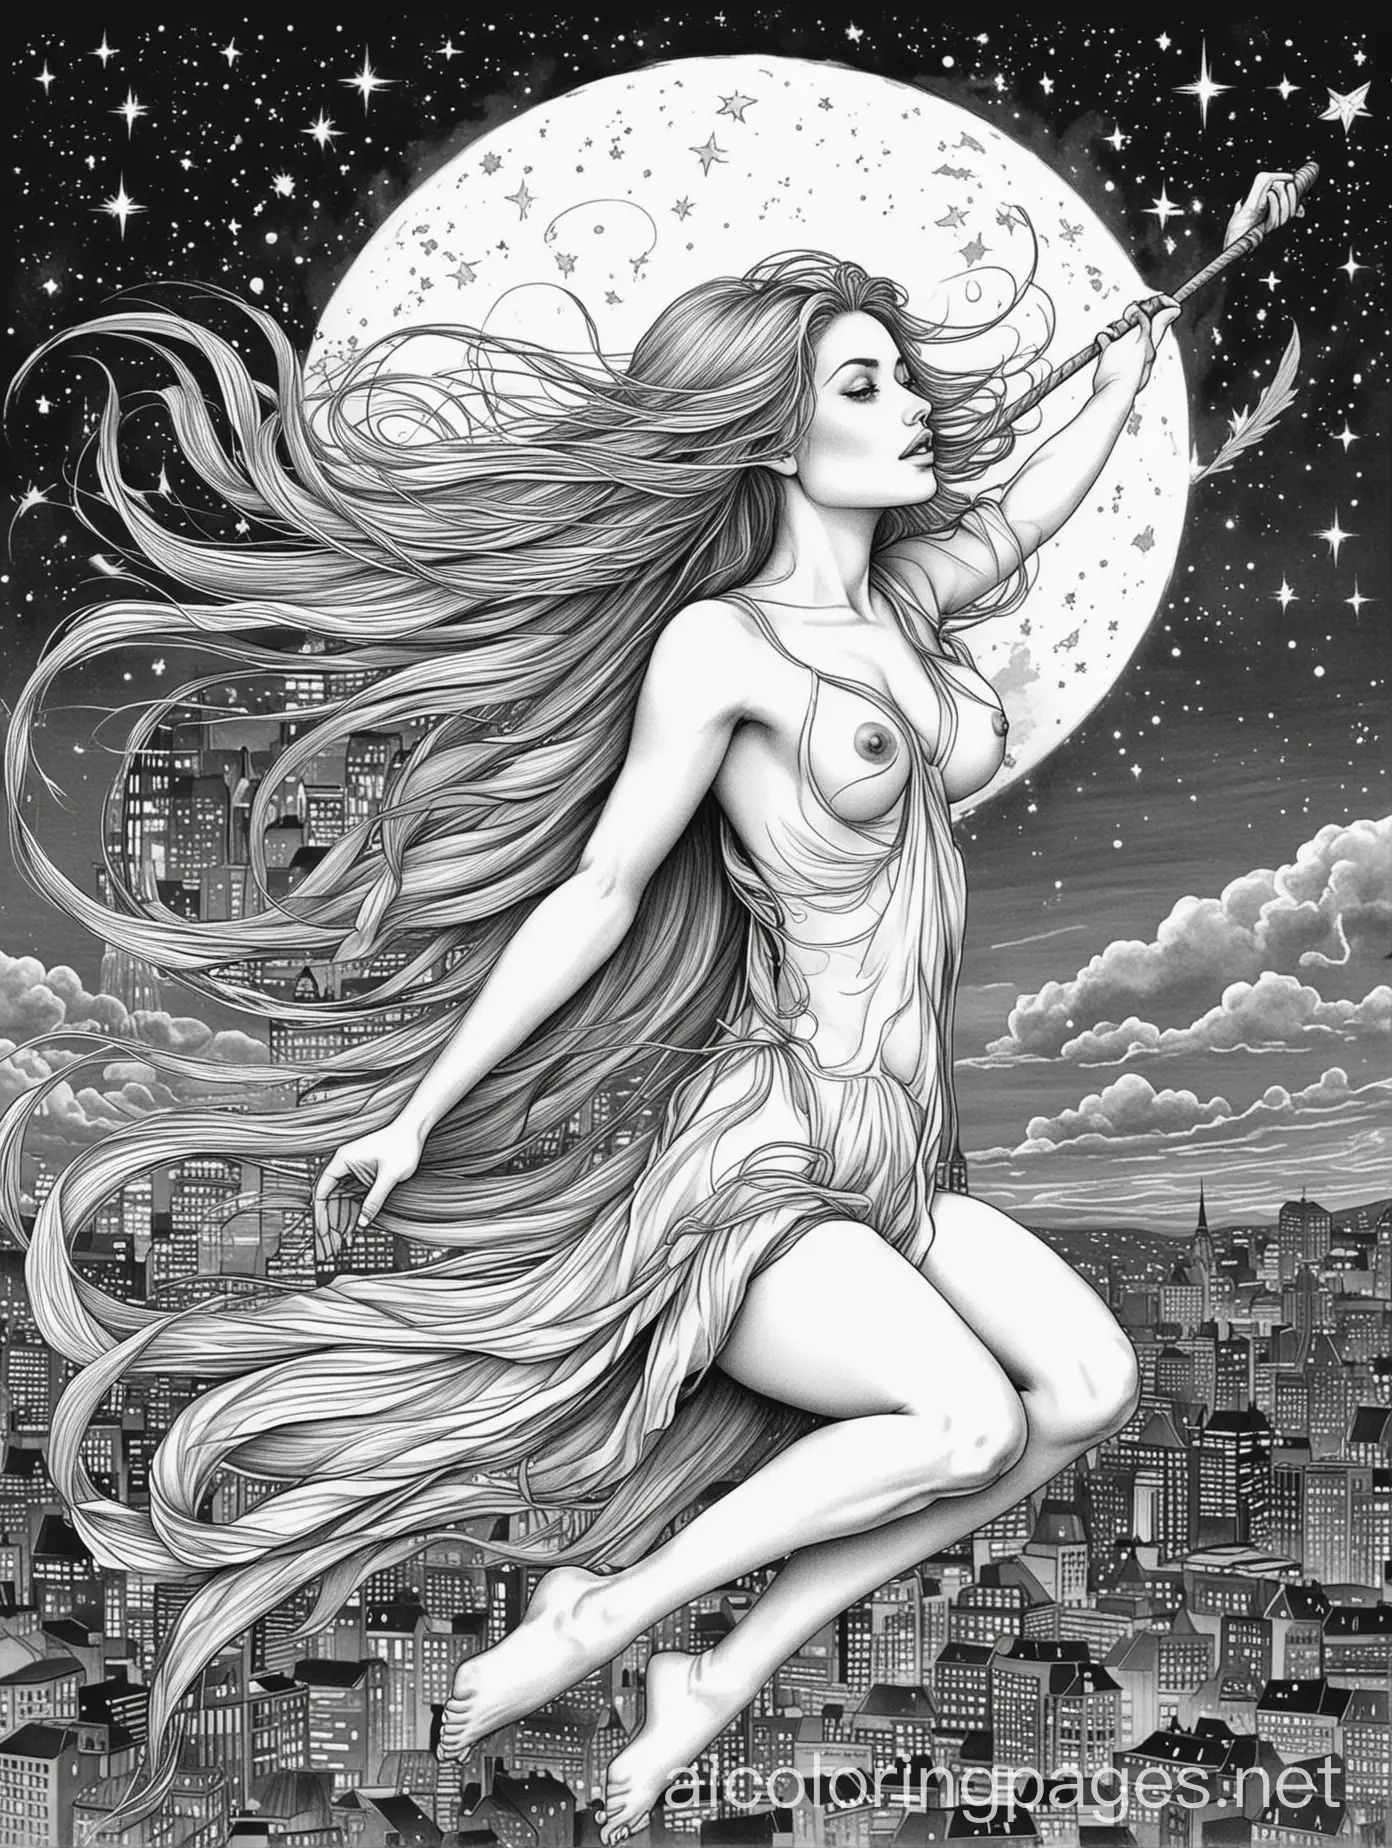 Nude-Woman-Flying-on-Broomstick-Over-City-Delightful-Coloring-Page